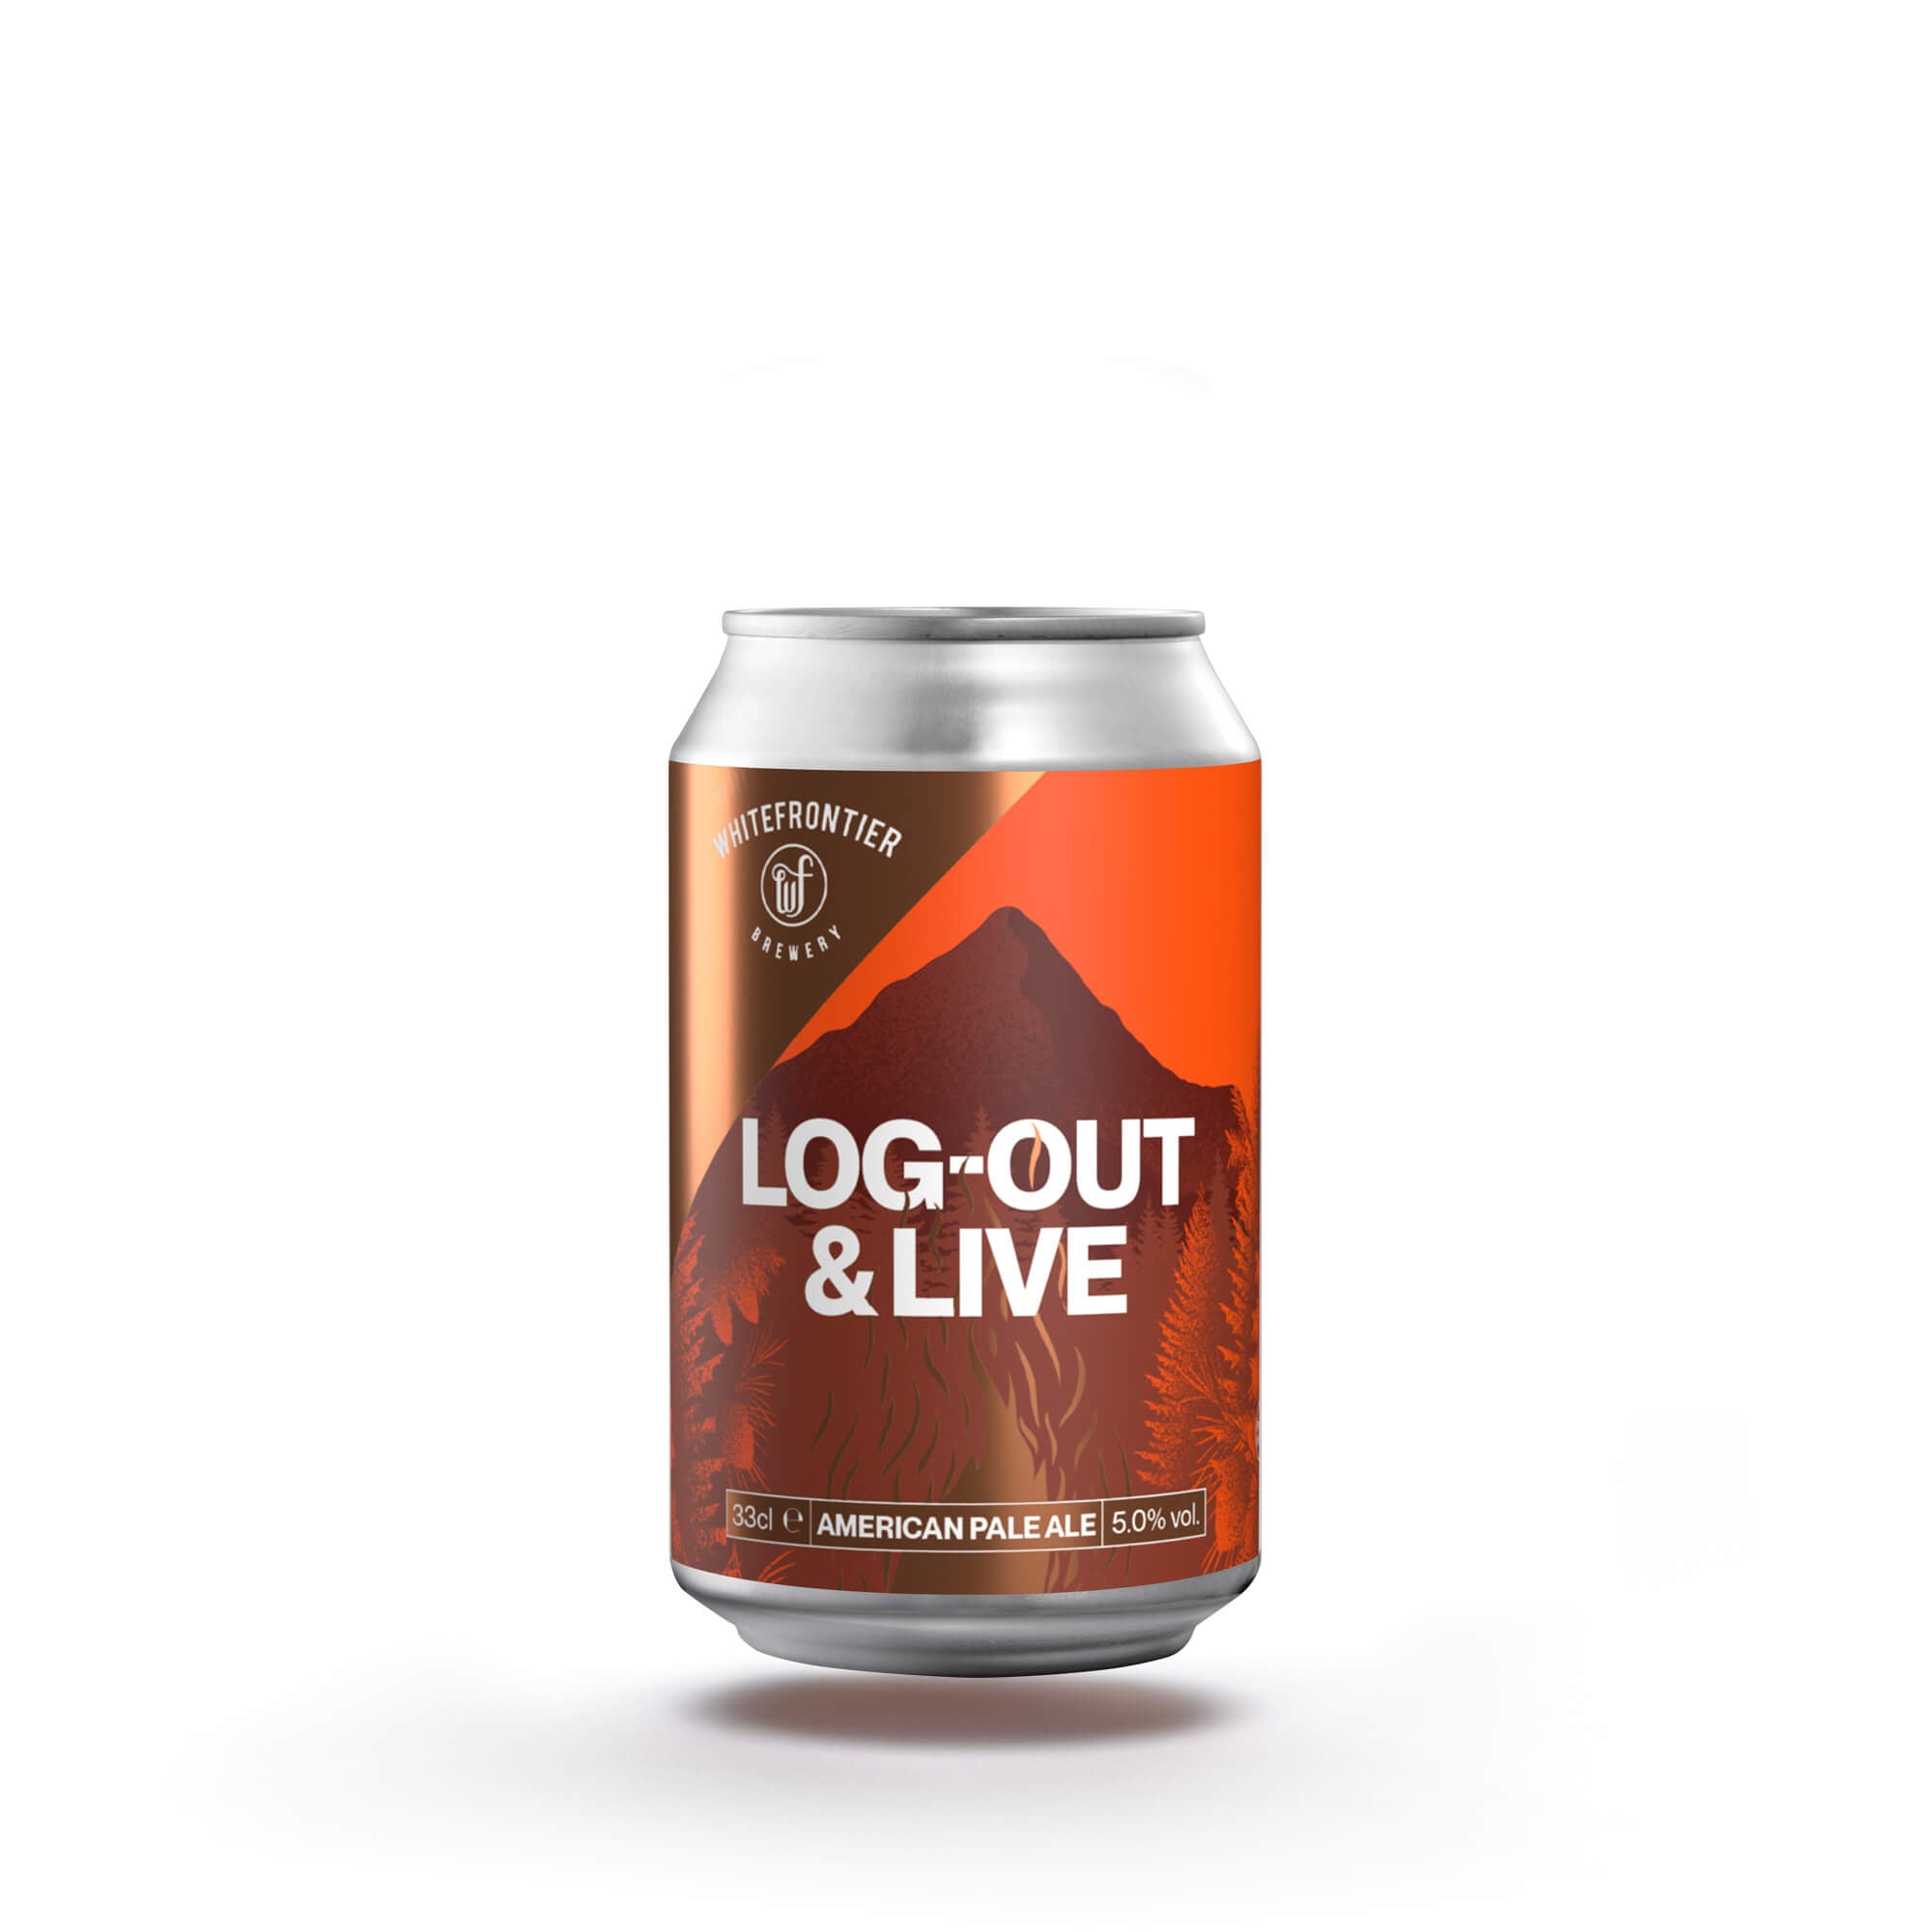 Log-out & Live